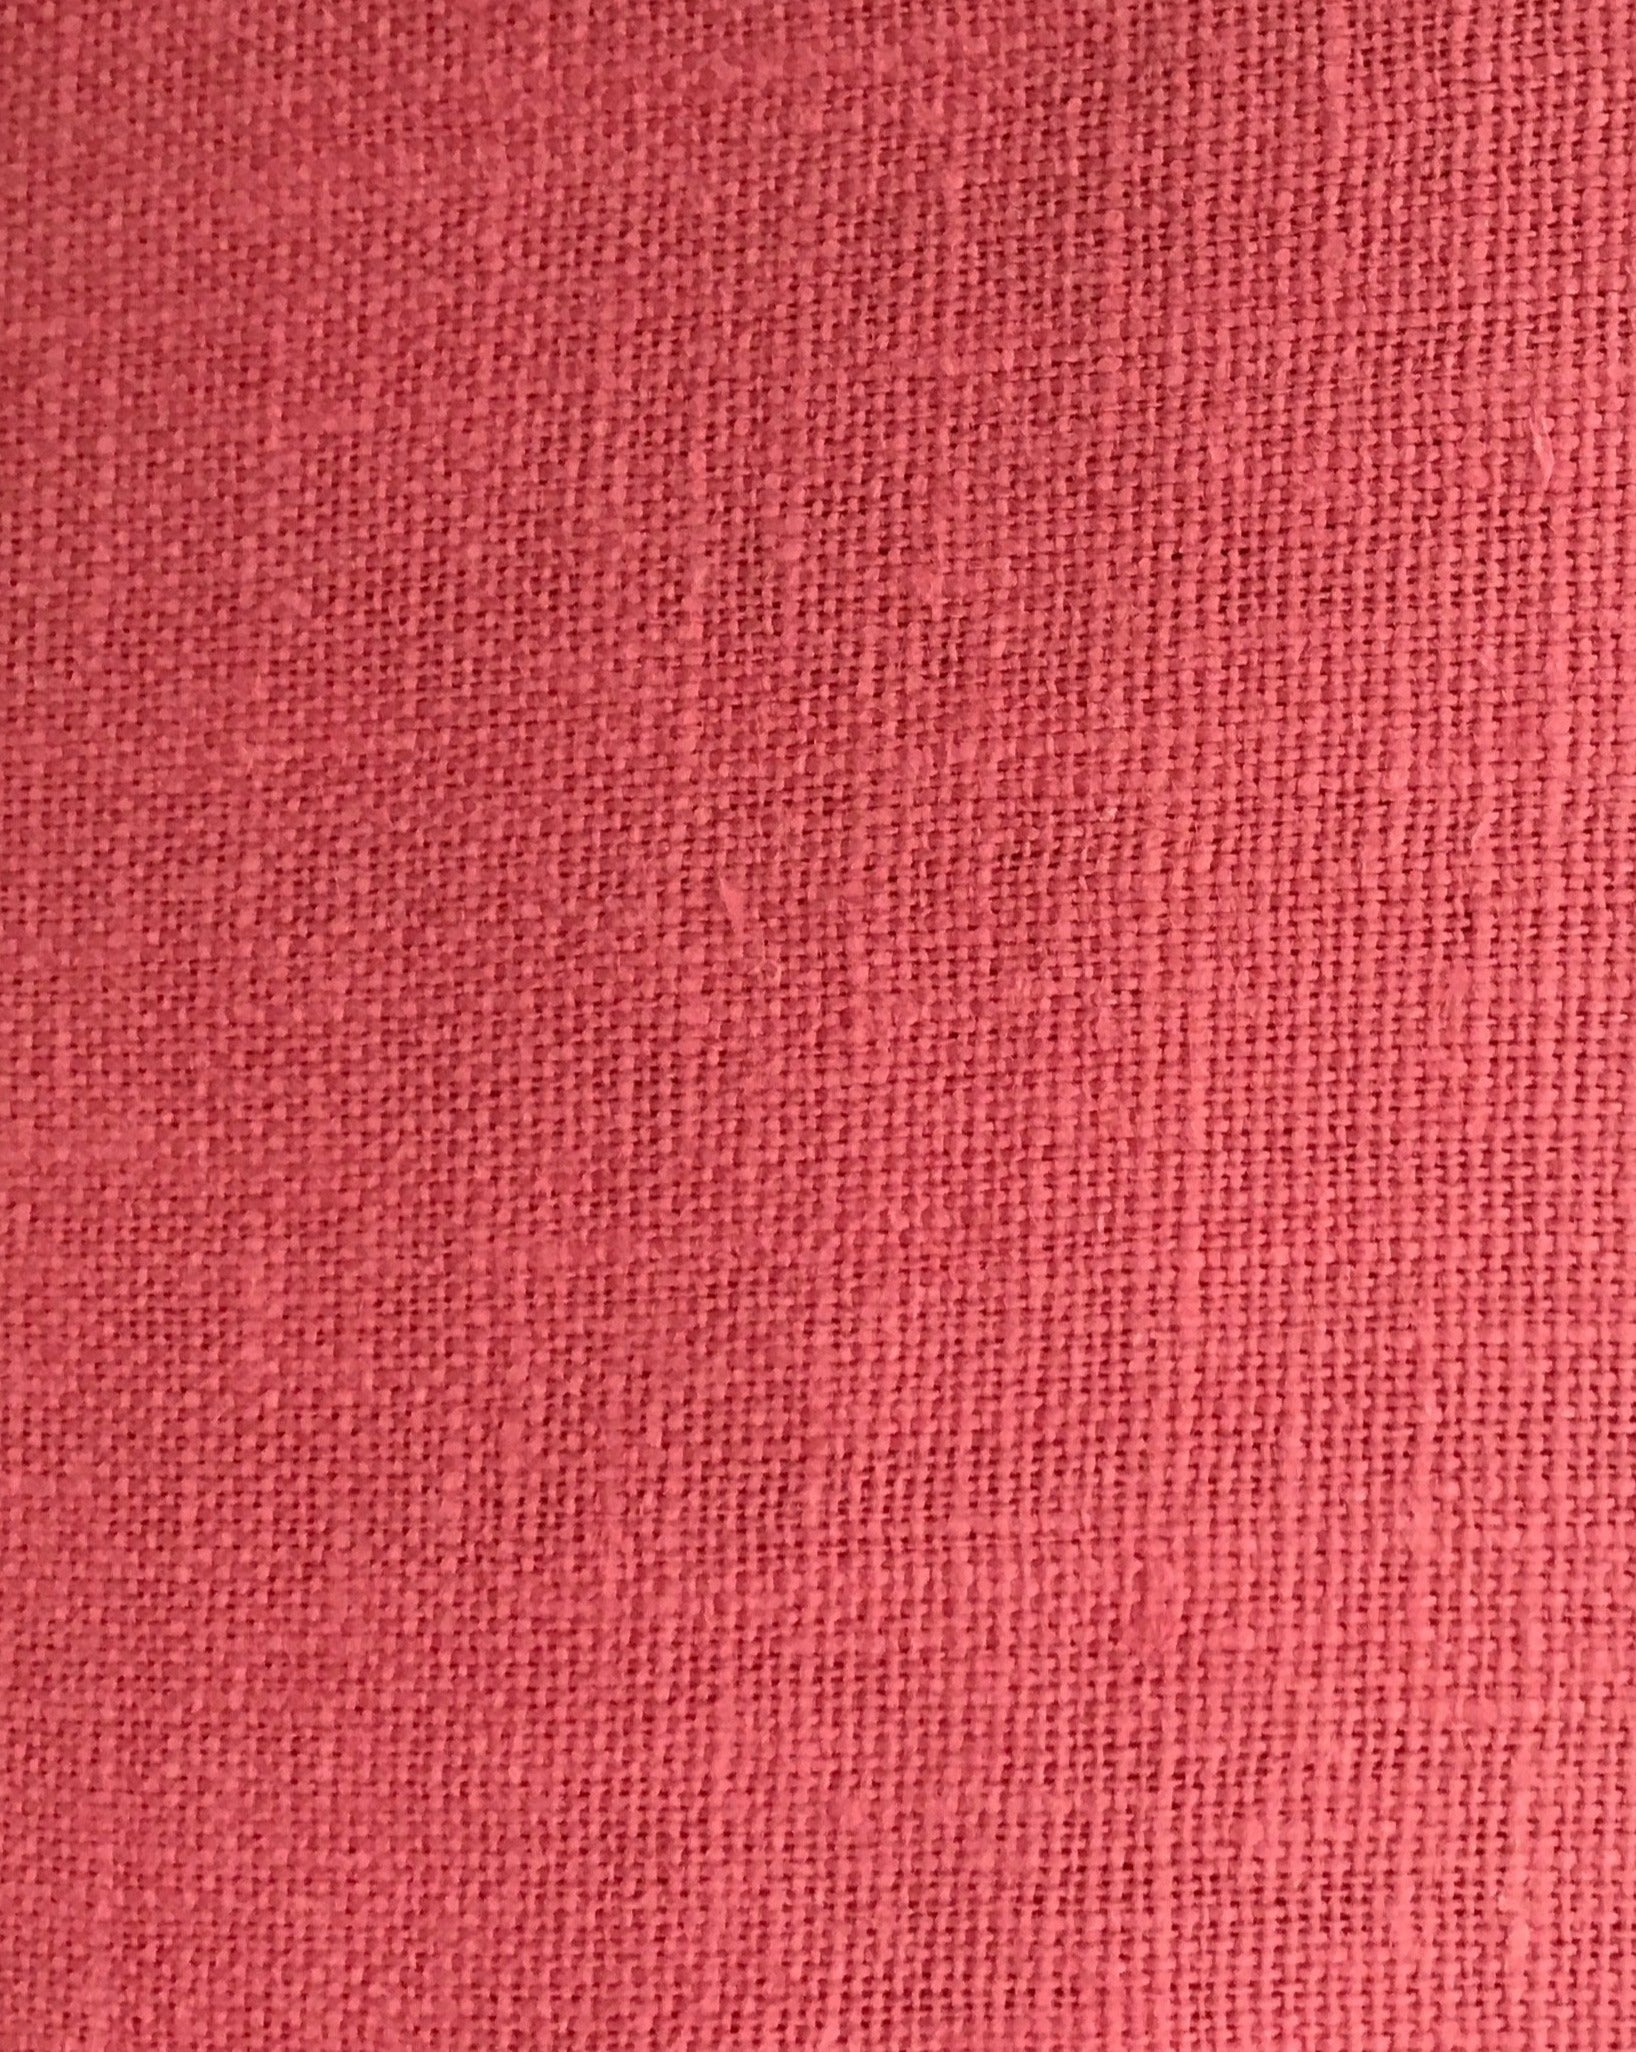 TUSCANY (EUROPEAN LINEN)  COLOR   CORAL SOFT    100% LINEN FABRICS 7.5 OZ . DYED & FINISHINED IN USA